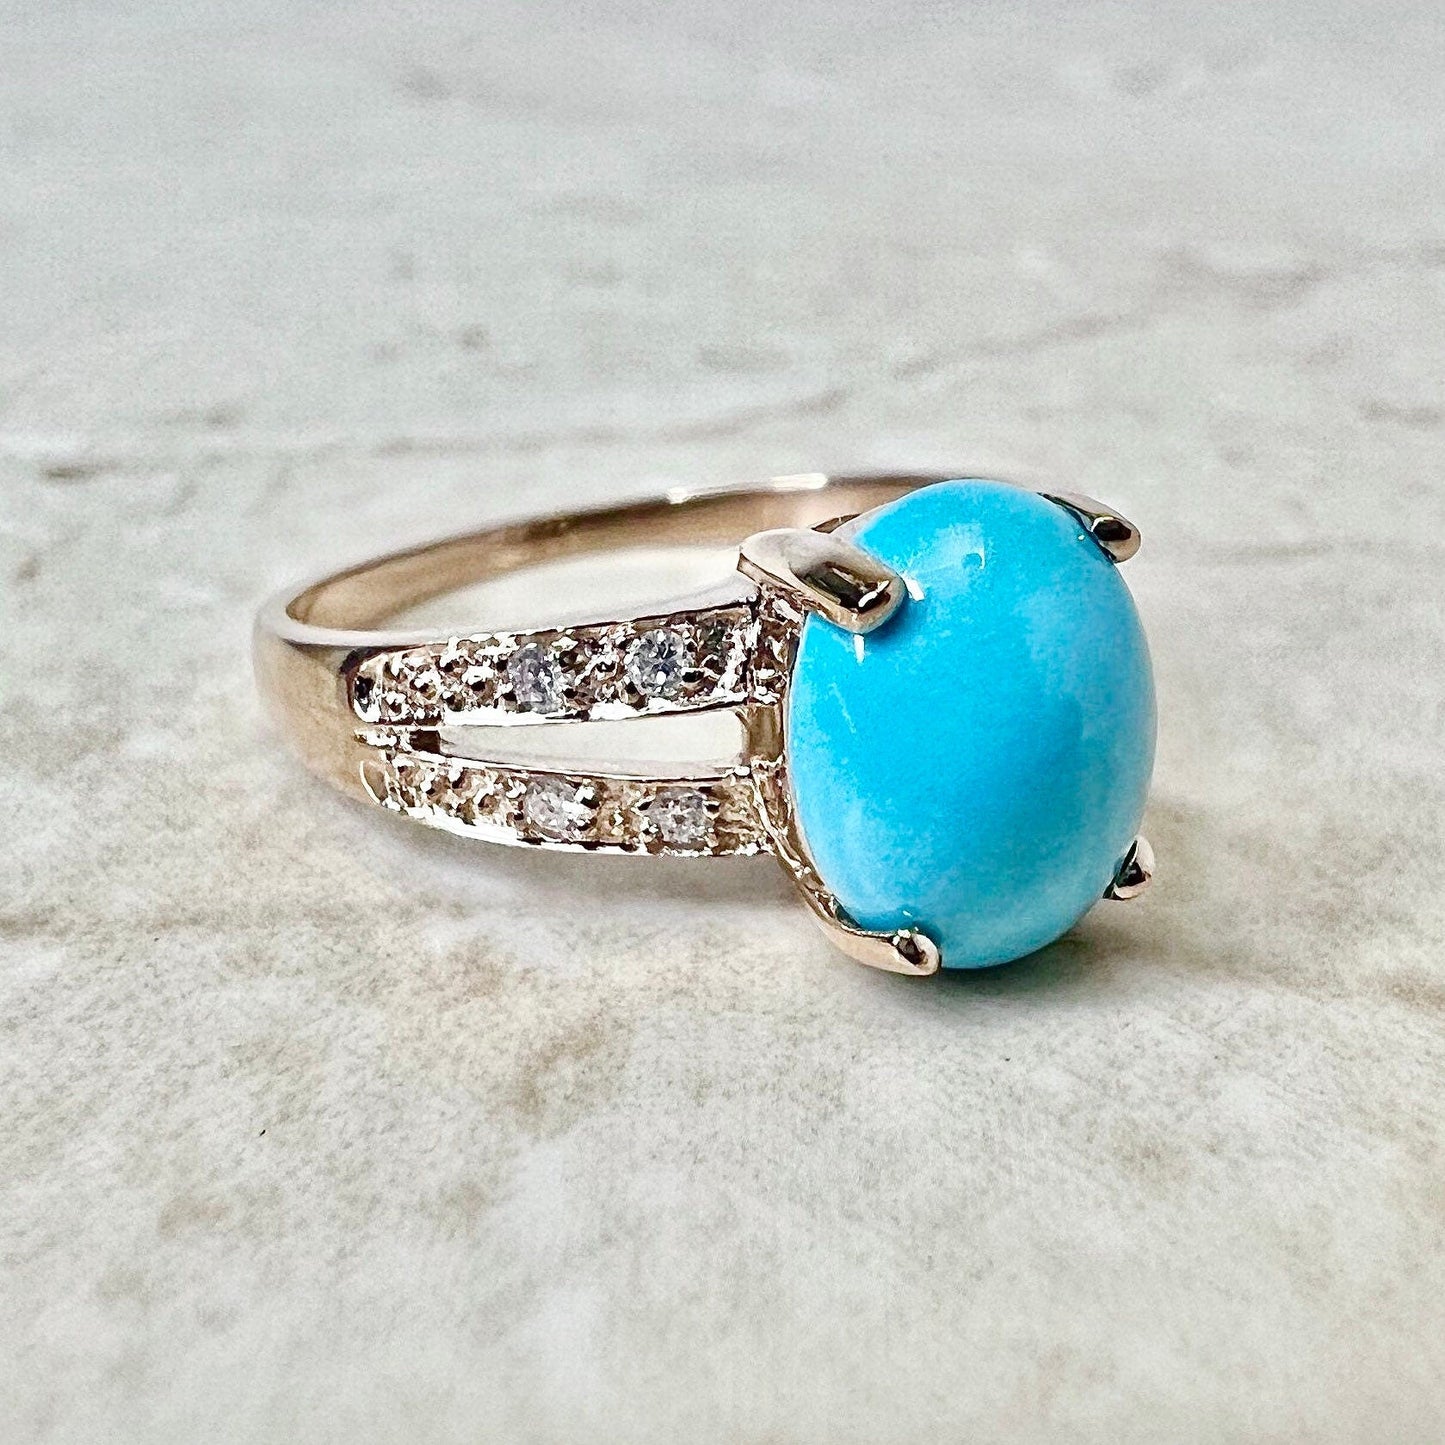 14K Gold Turquoise & Diamond Cocktail Ring - Rose Gold Turquoise Ring - Solitaire Ring - December Birthstone - Birthday Gift For Her